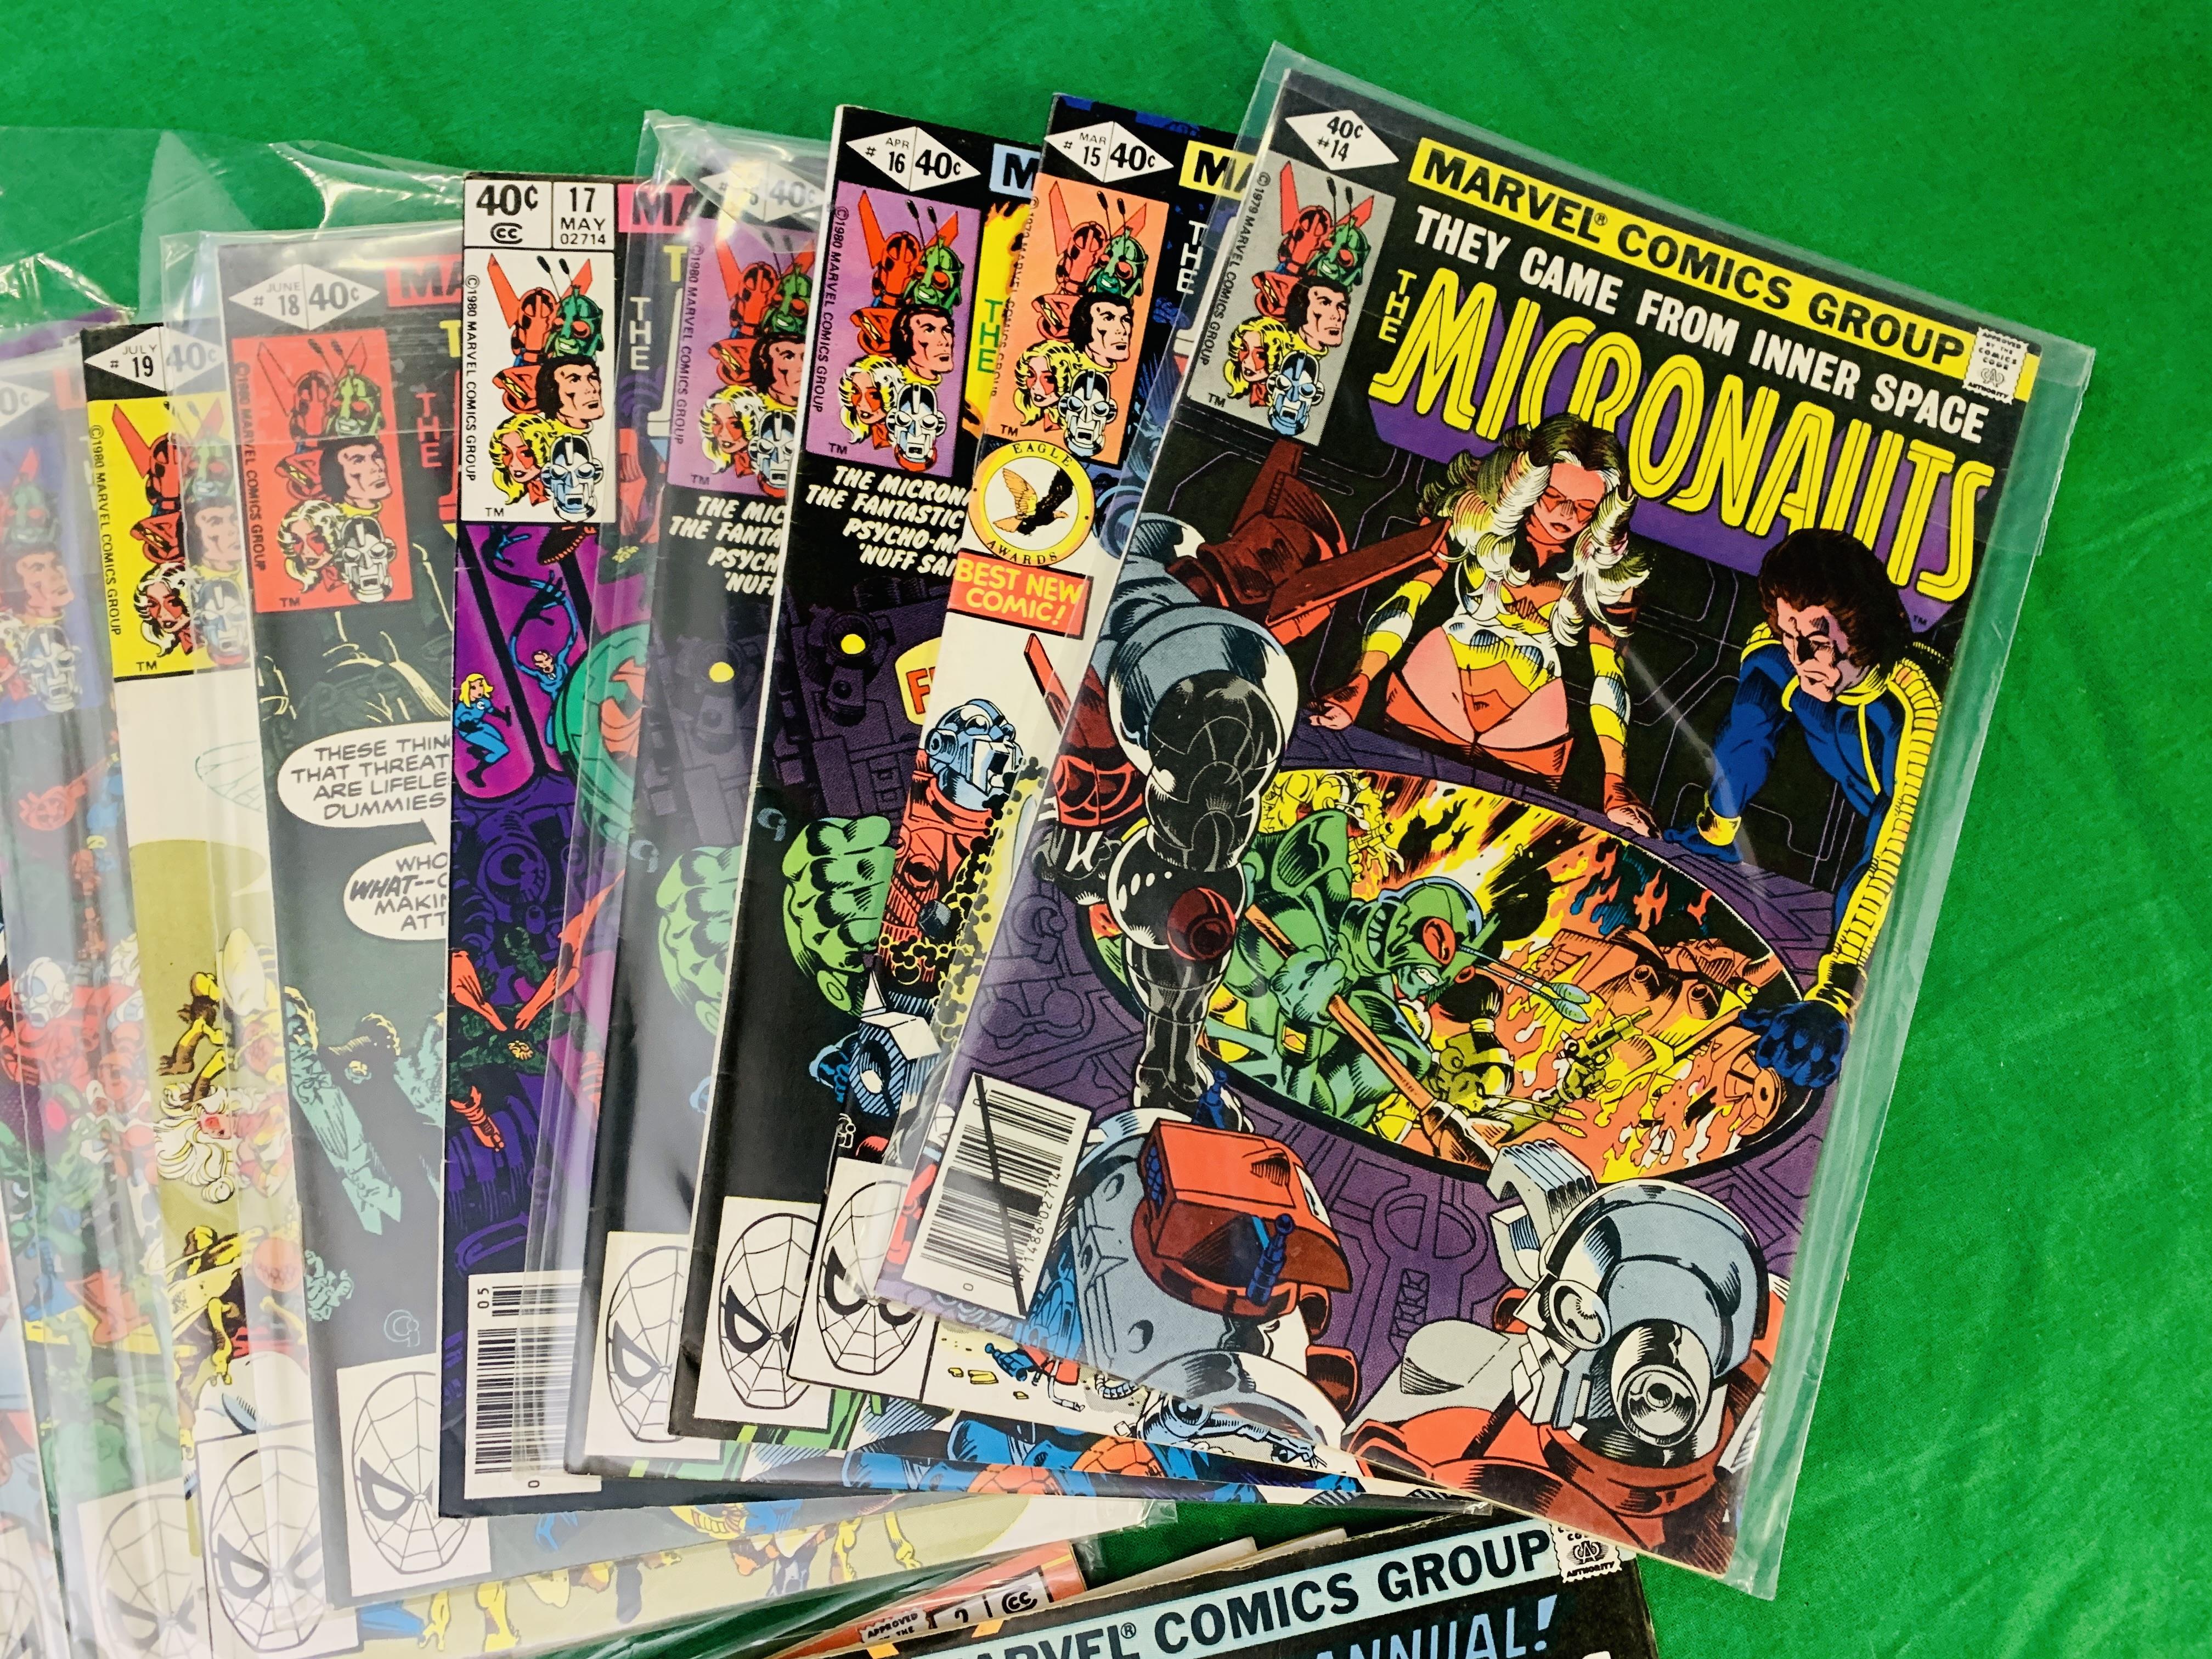 MARVEL COMICS THE MICRONAUTS NO. 1 - 59 FROM 1979. NO. 18 - 19, 21, 37, 53, 57 HAVE RUSTY STAPLES. - Image 19 of 27